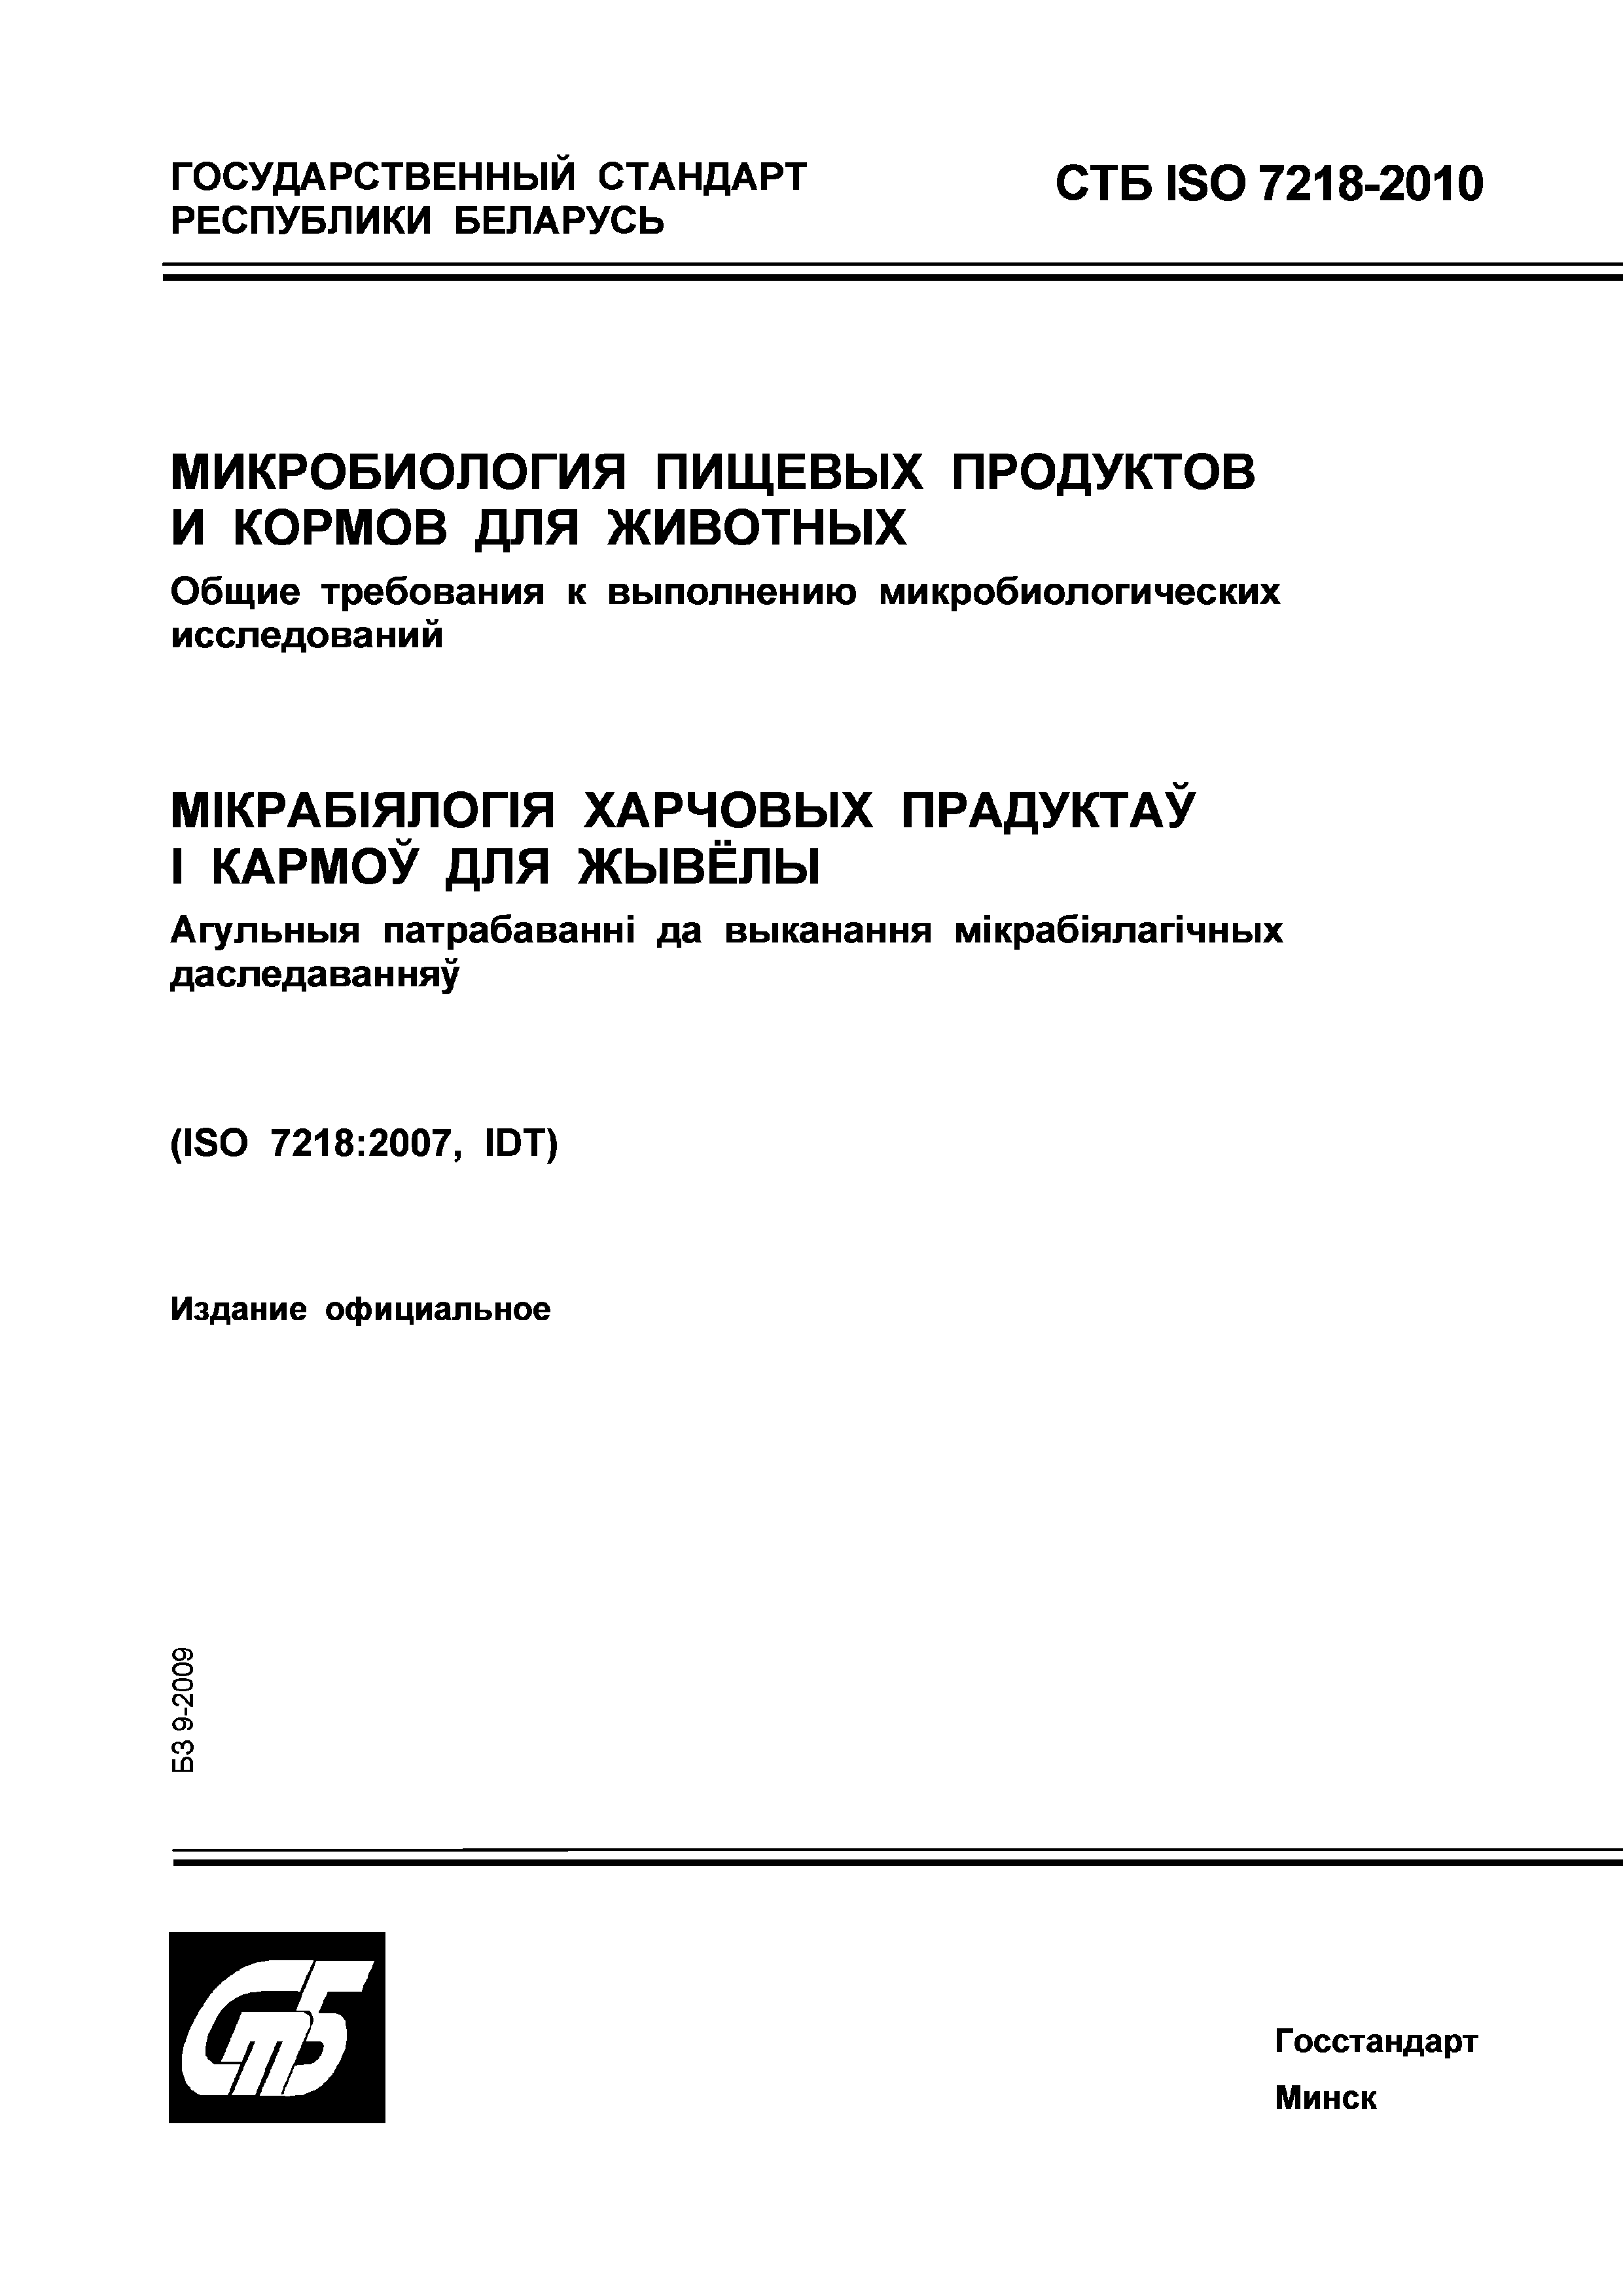 СТБ ISO 7218-2010